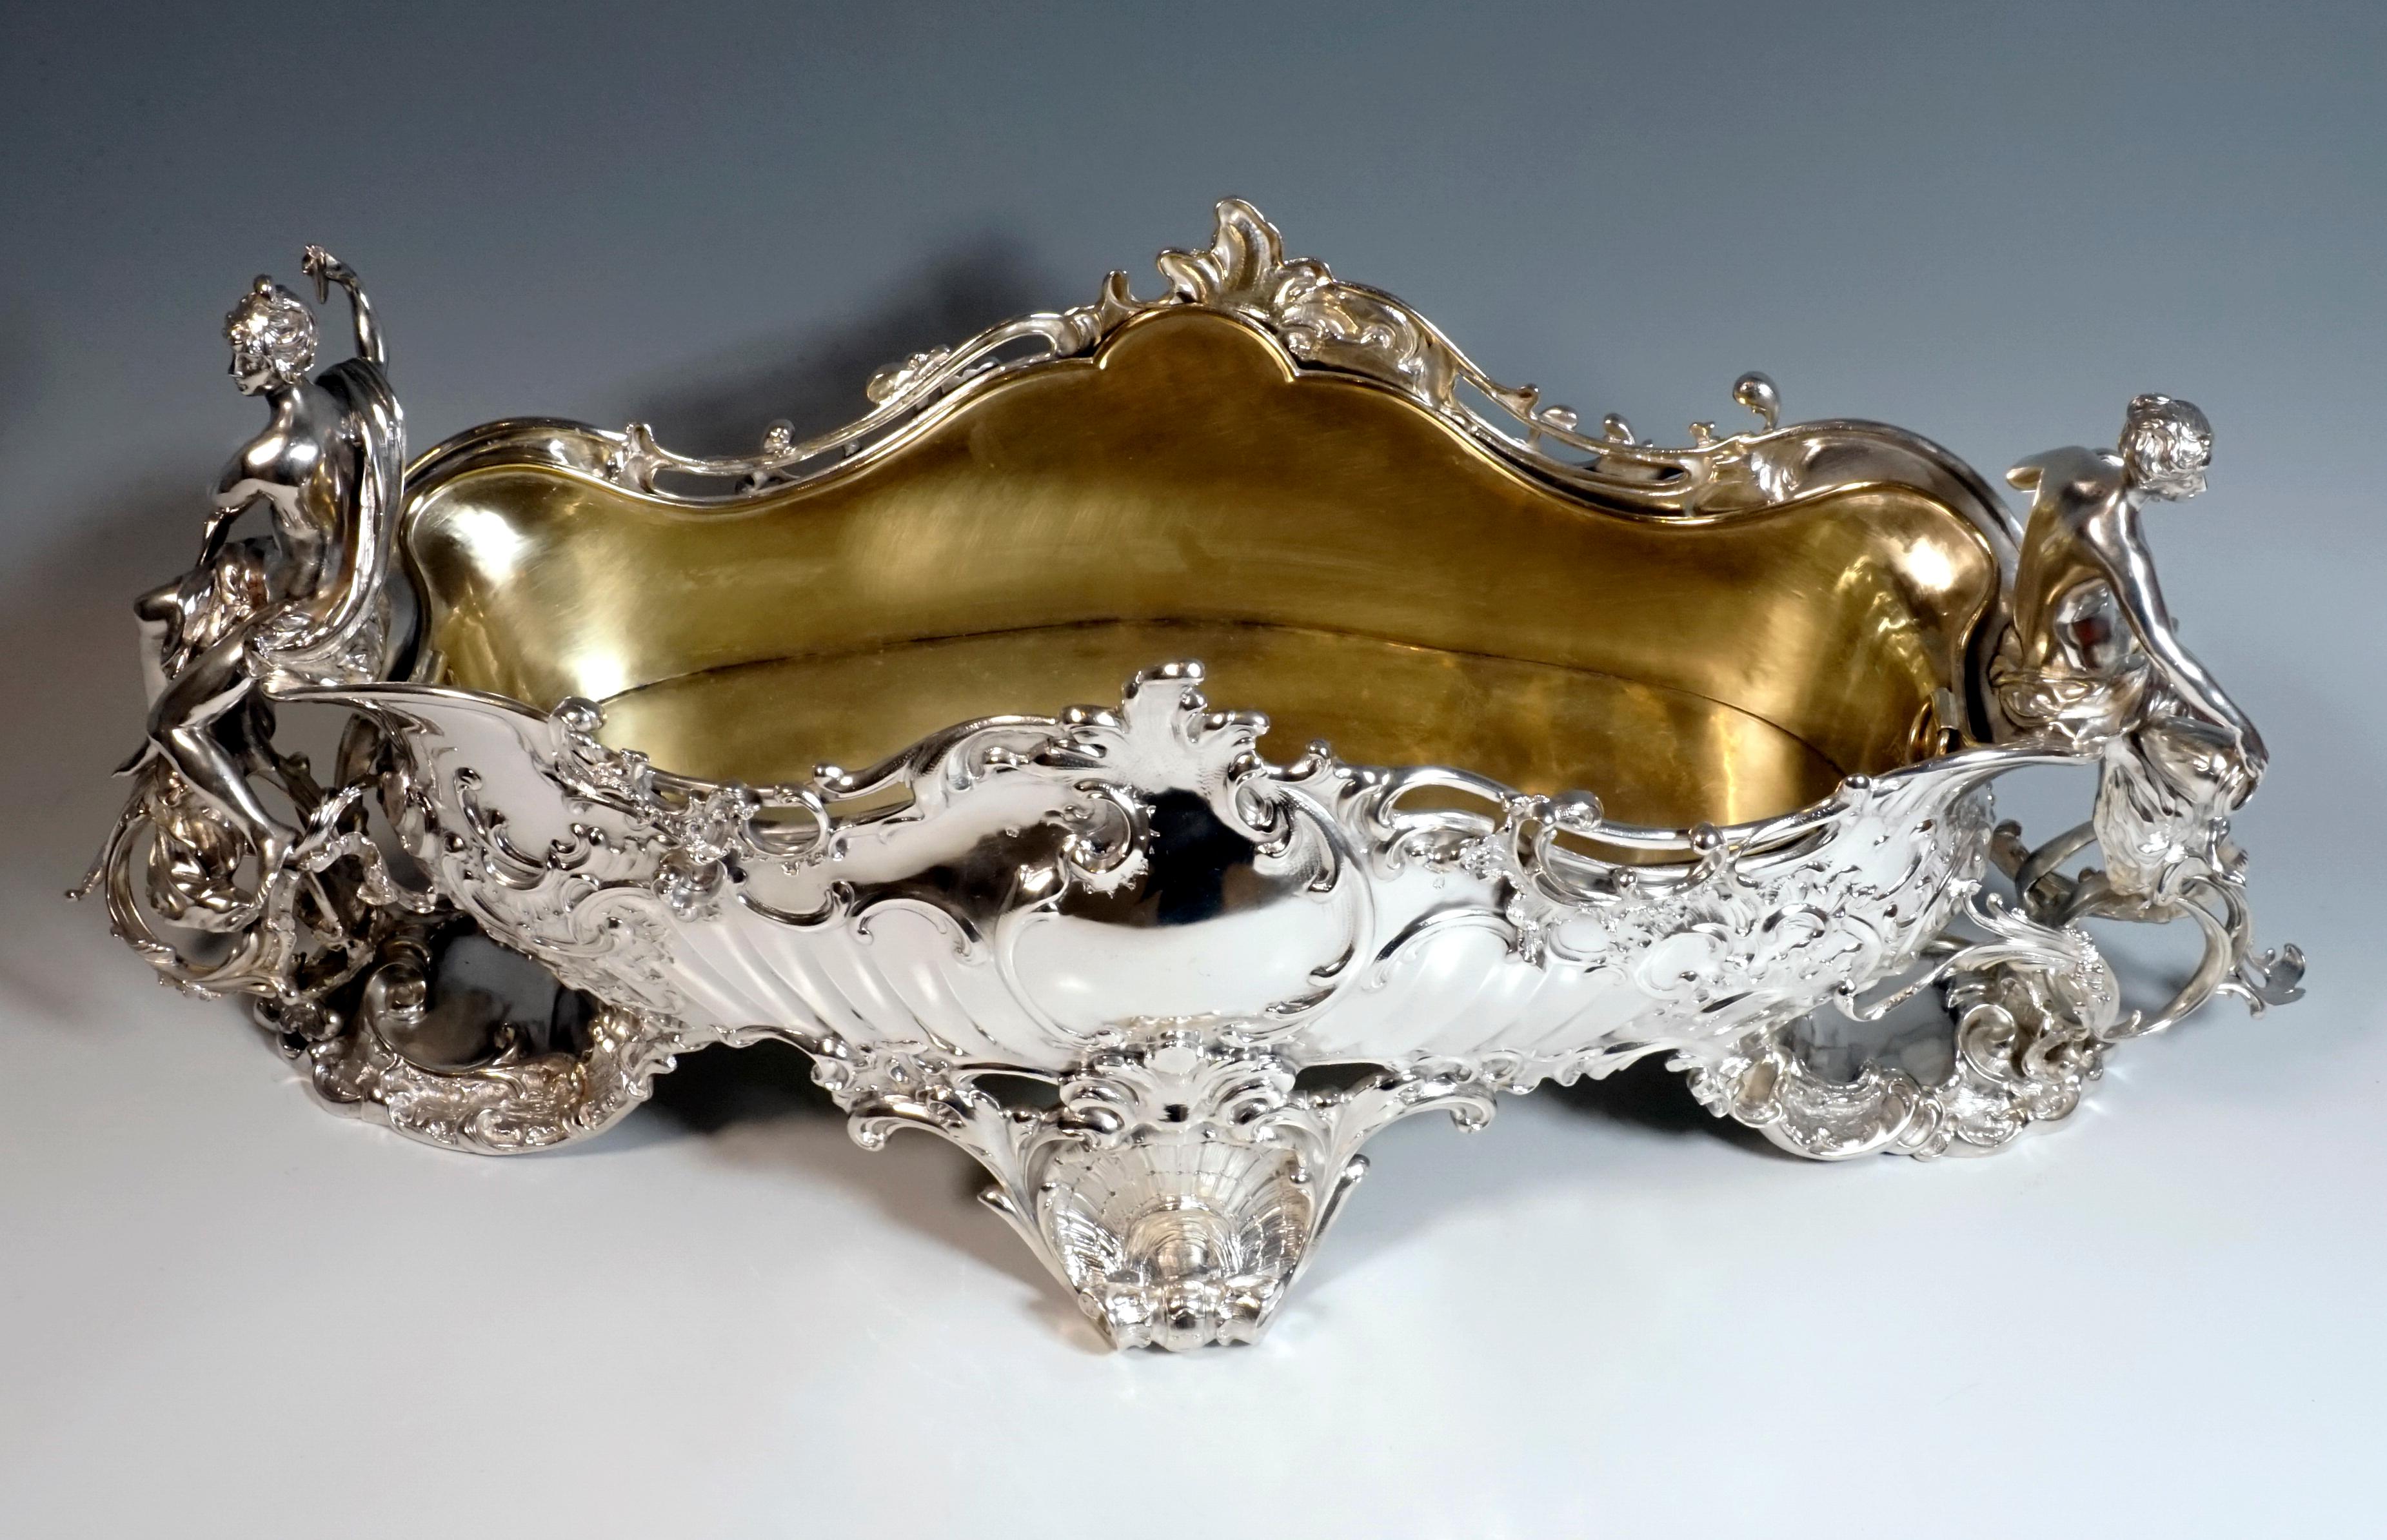 English Large Viennese Silver Ornate Centerpiece with Nymphs by Brüder Frank, circa 1890